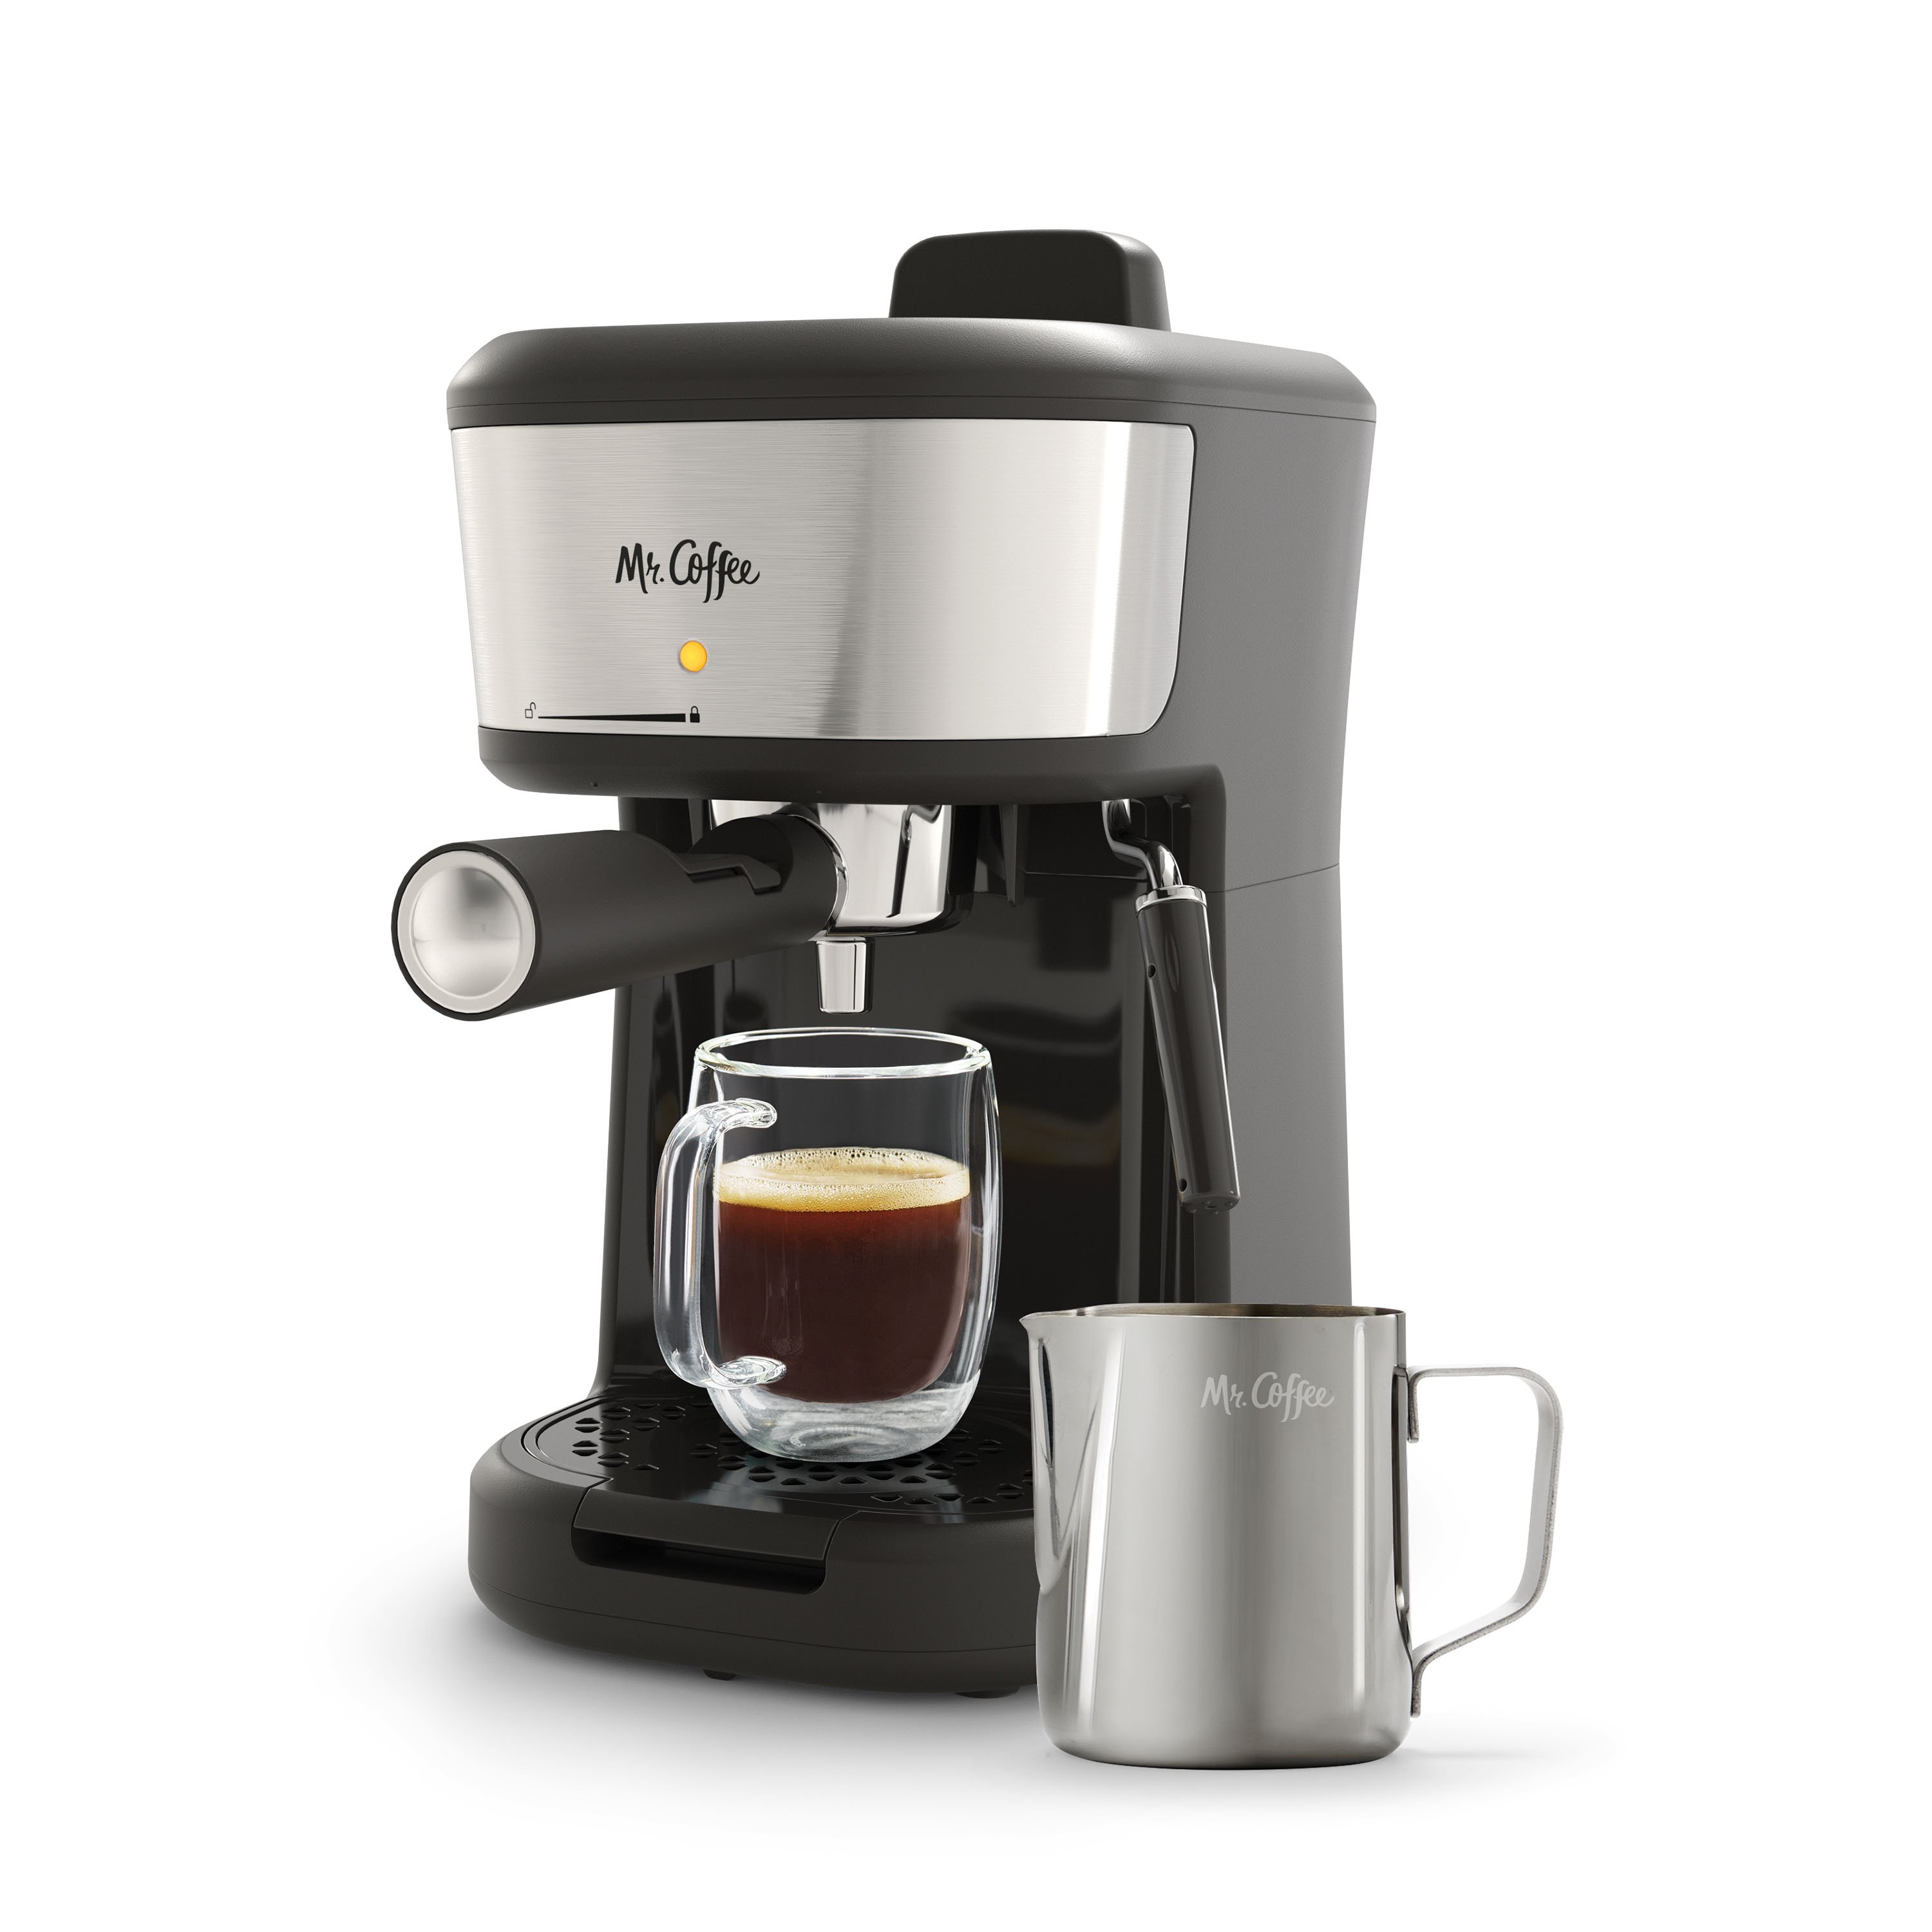 Mr. Coffee One-Touch CoffeeHouse+ Espresso, Cappuccino, and Latte Maker  Home Coffee Machine with 19-Bar Italian Pump, and Milk Frother Ideal for